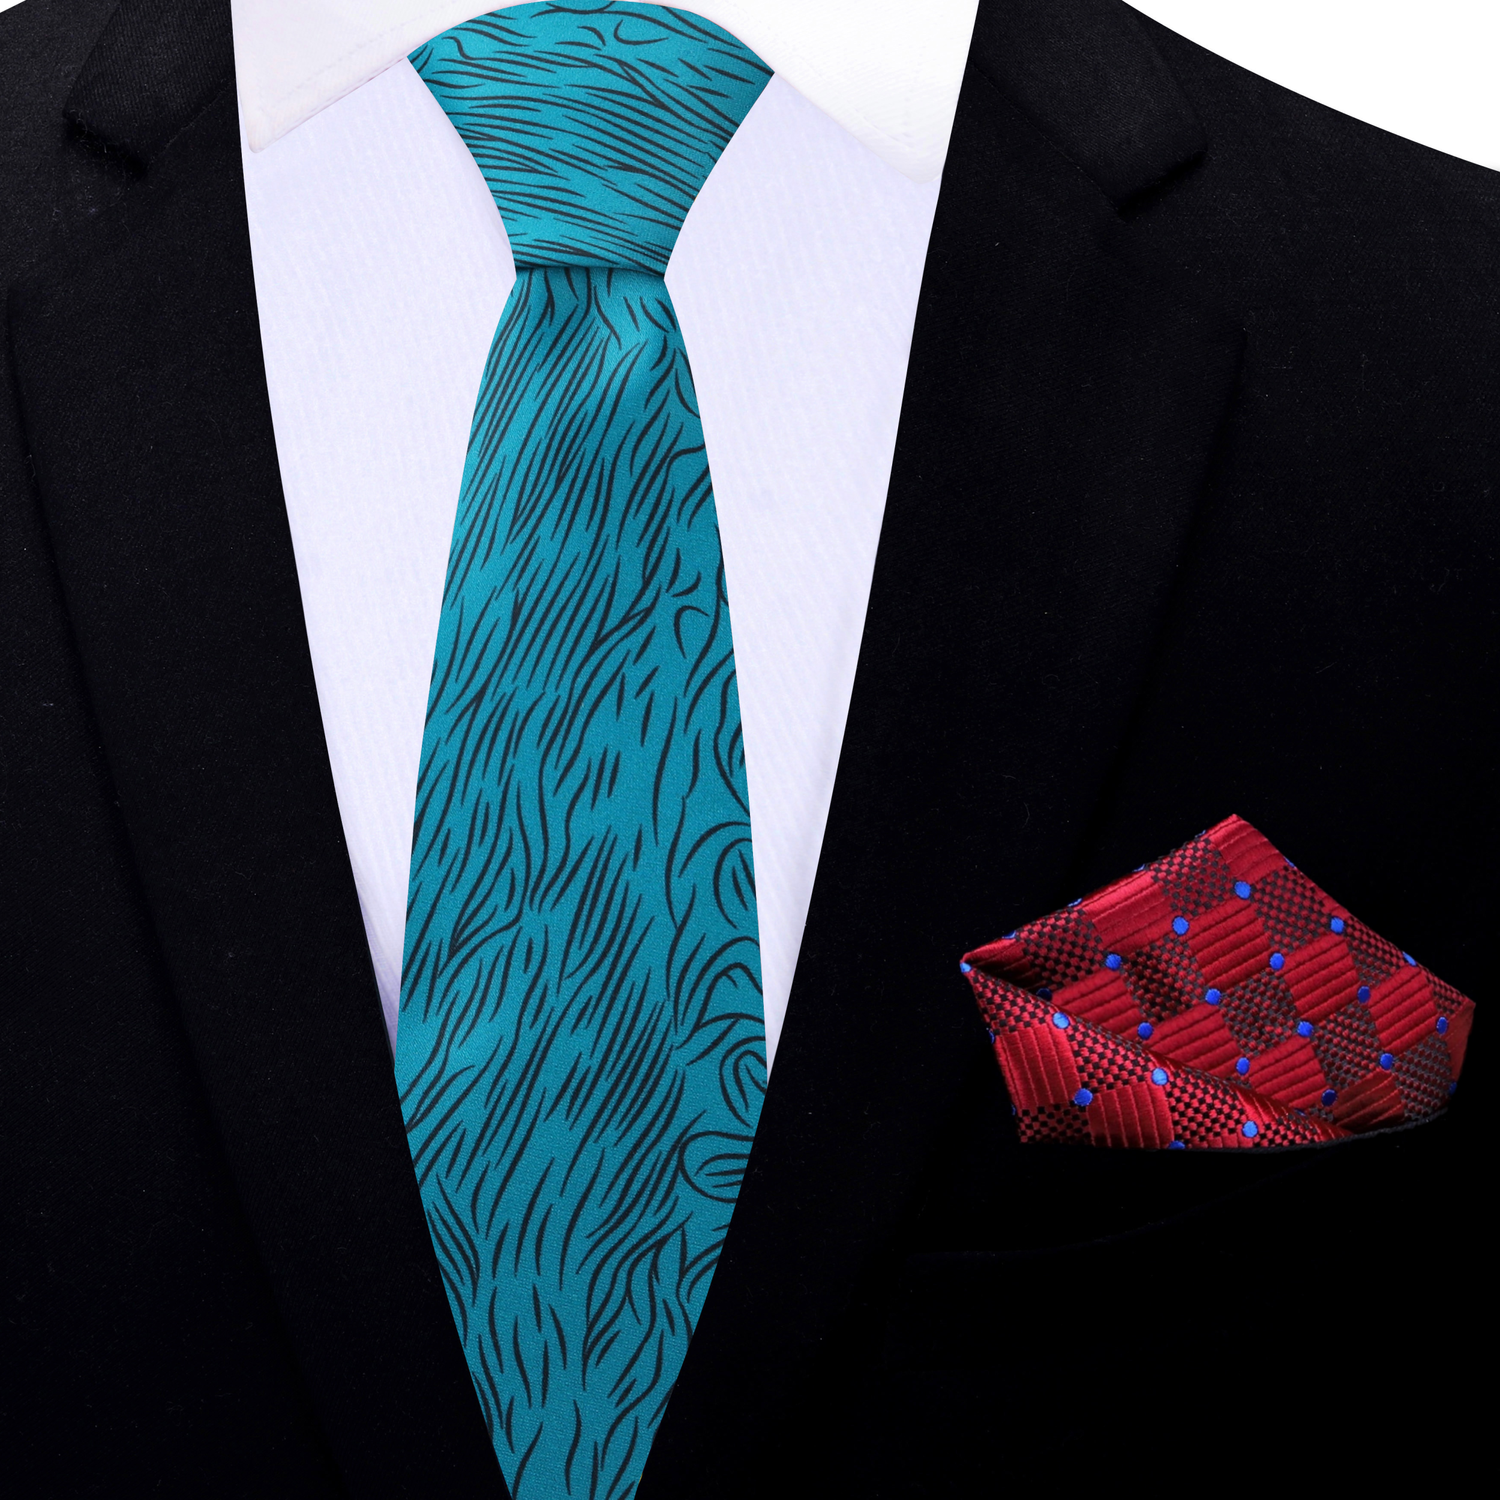 Thin Tie: Teal Blue, Black Abstract Lines with Accenting Burgundy Geometric Square